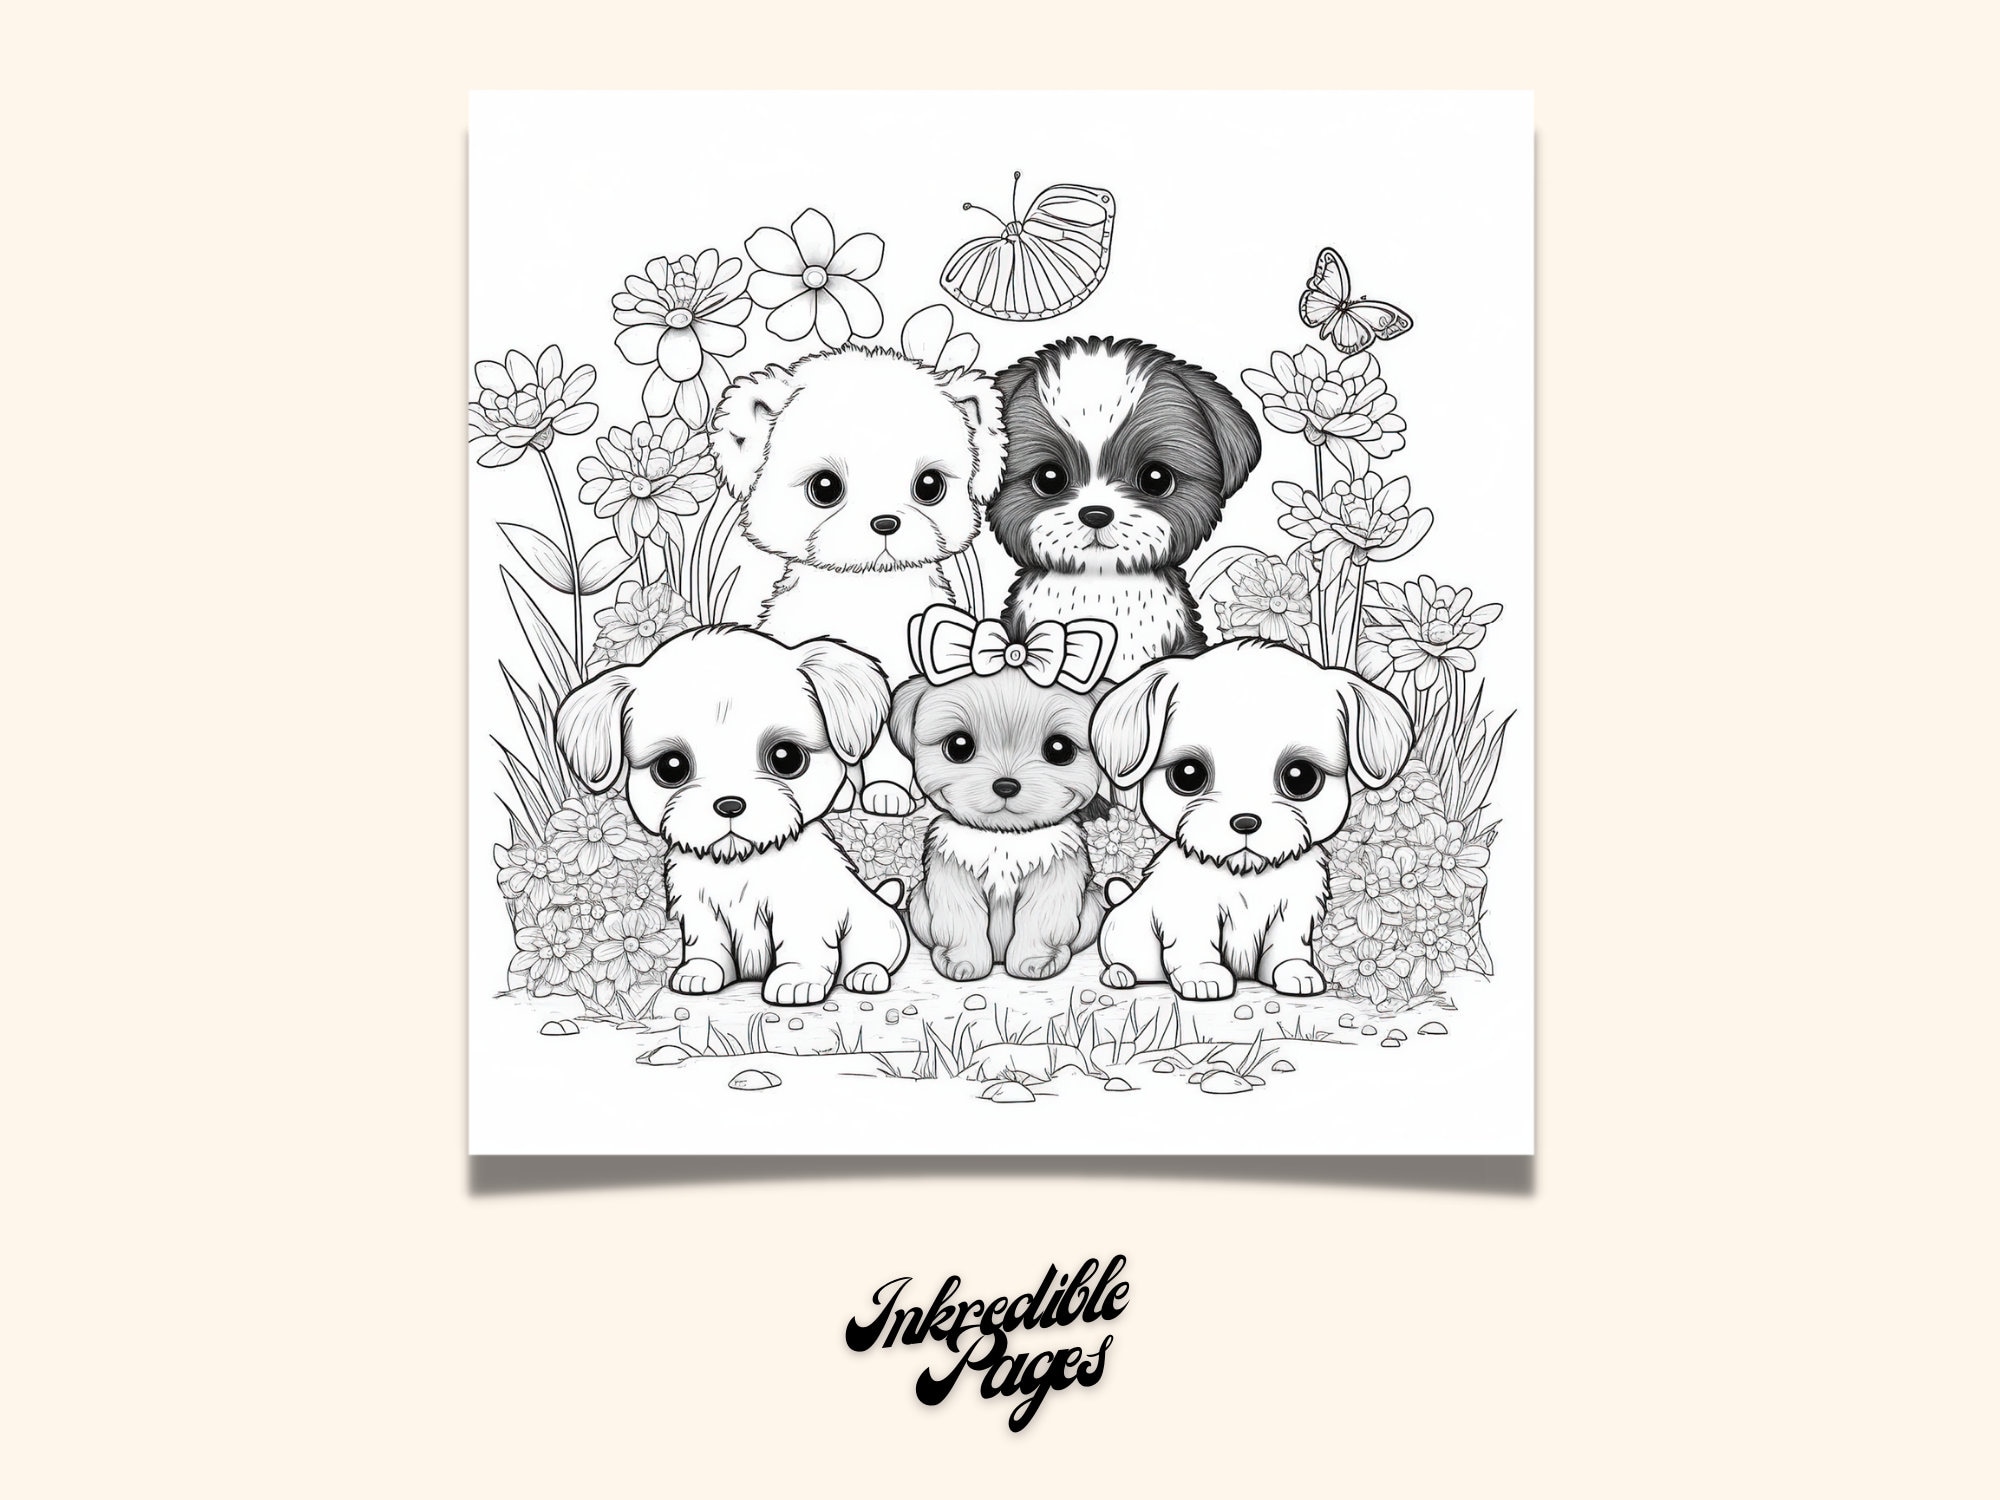 Cute Dogs and Puppies, amazing and cute coloring book for adults: Adult  Coloring Book  Stress Relieving Creative Fun Drawings to Calm Down, Reduce  Anxiety & Relax. Great gift for women or